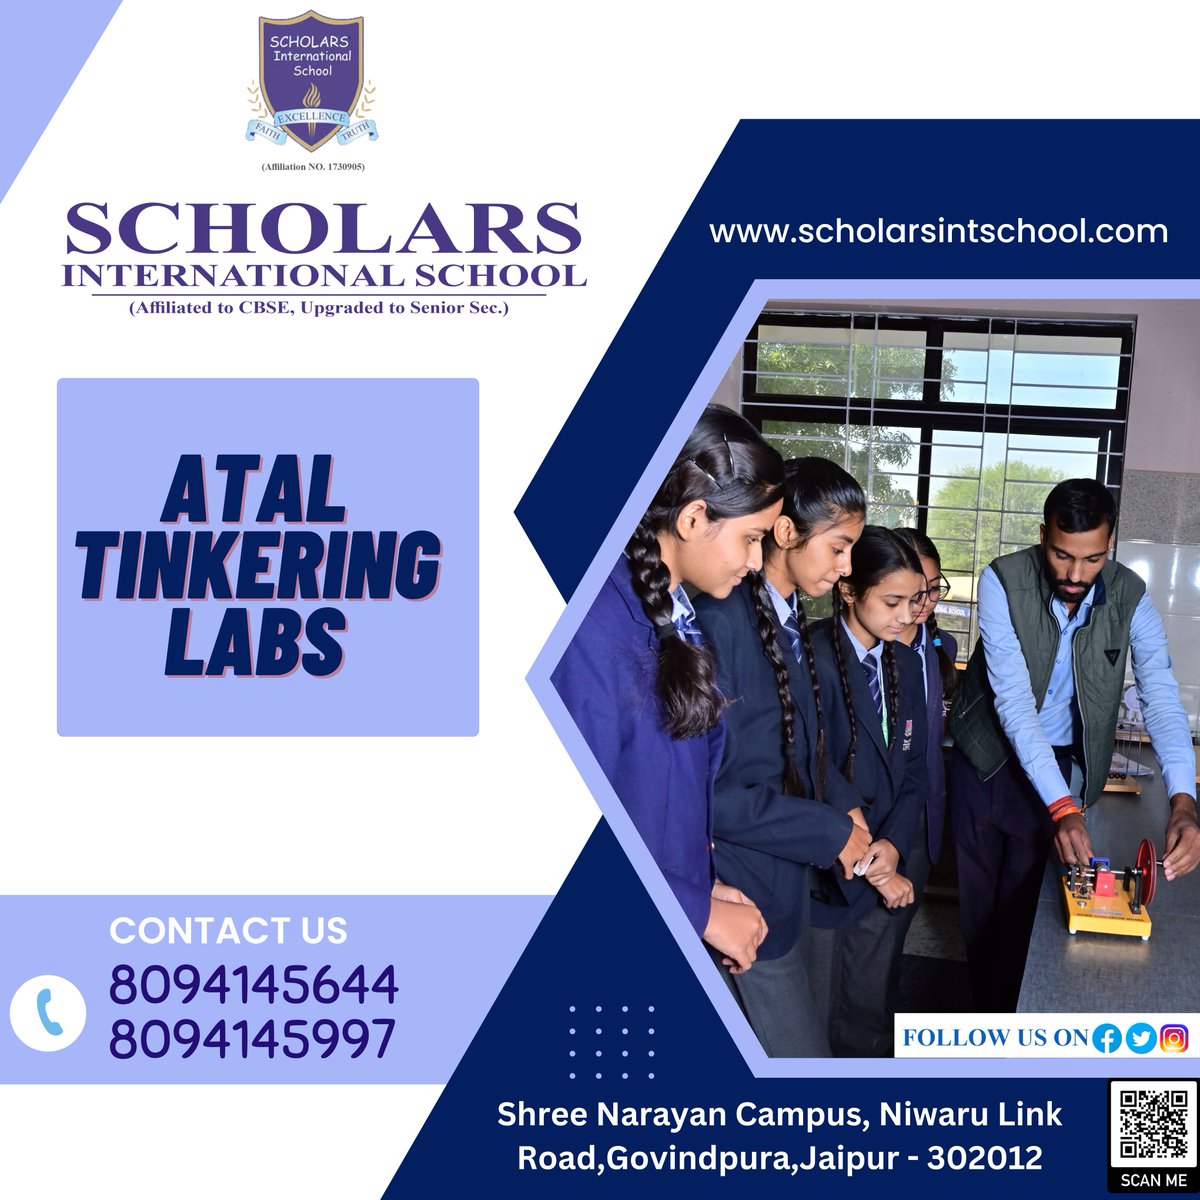 #presenting #quickview of #school #wellequipped #labs where #students can explore their #ideas practically #extracurricularactivities #scholarsintschooljaipur #scholarsinternationalschooljaipur #scholarsinternationalschool #scholarsjaipur, #followus #follownow